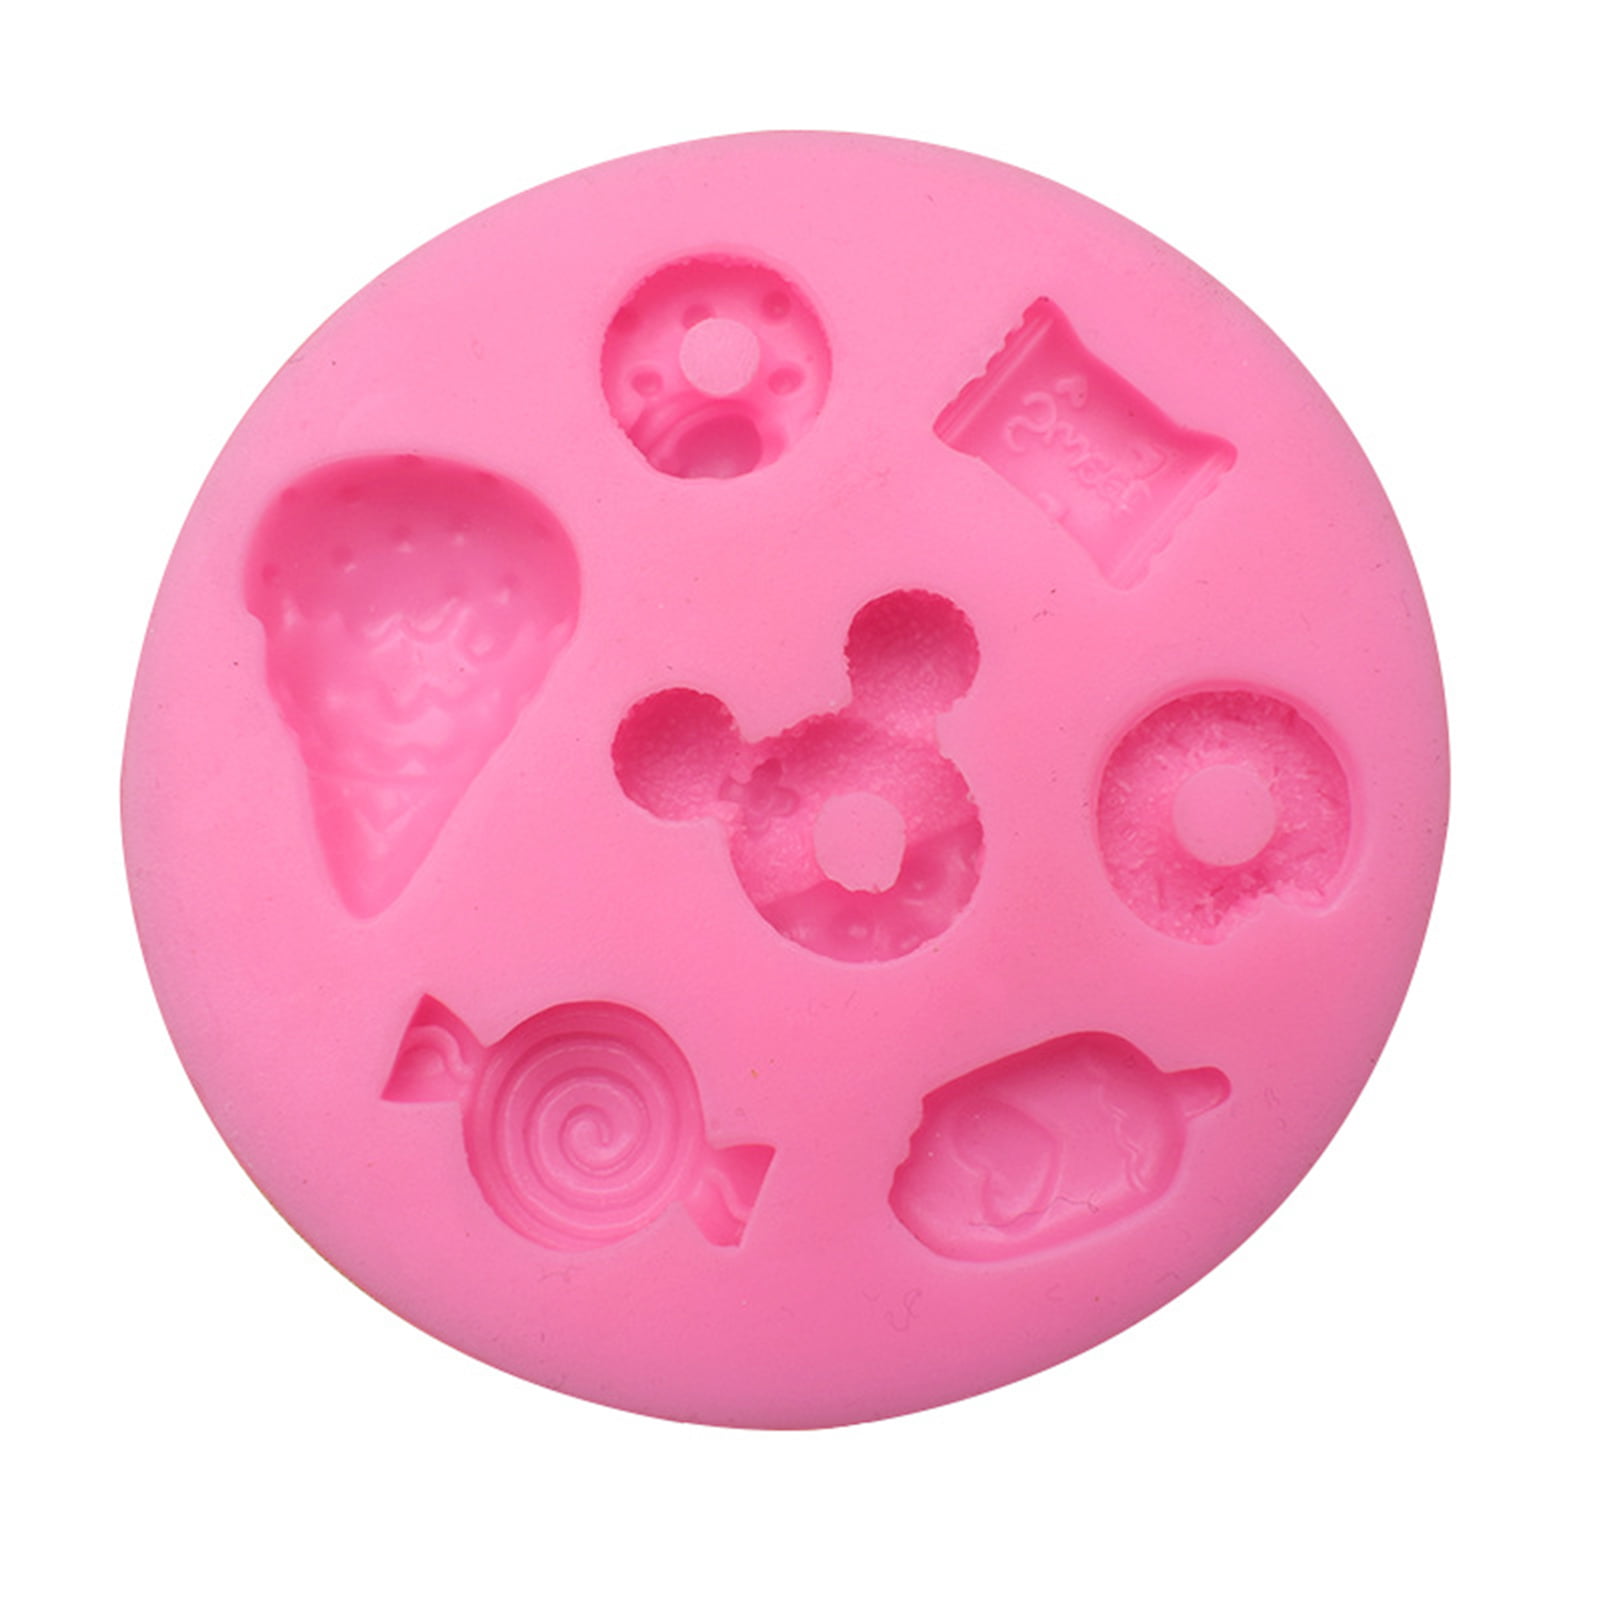 Details about   Hello Kitty Round Silicone Mold 